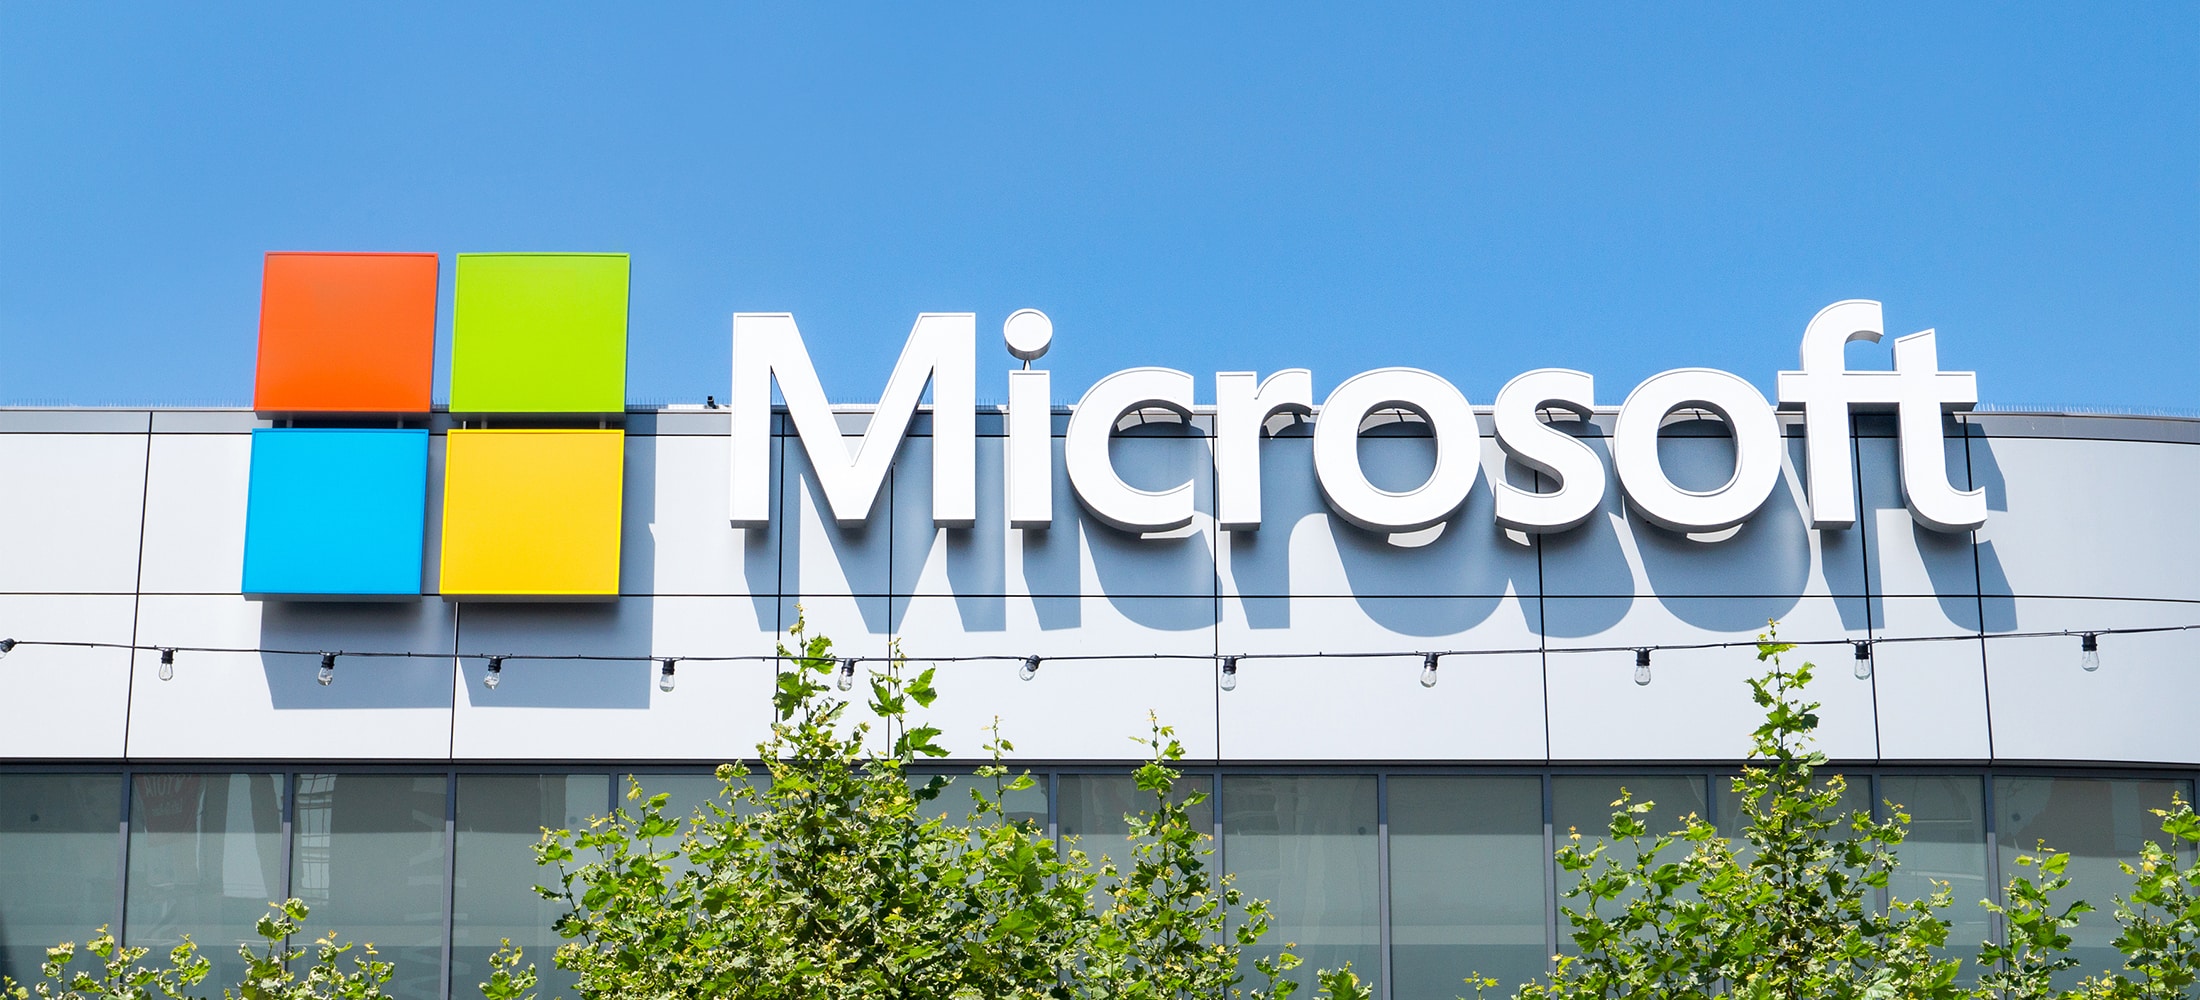 Microsoft Announcement Great News for Partner Community